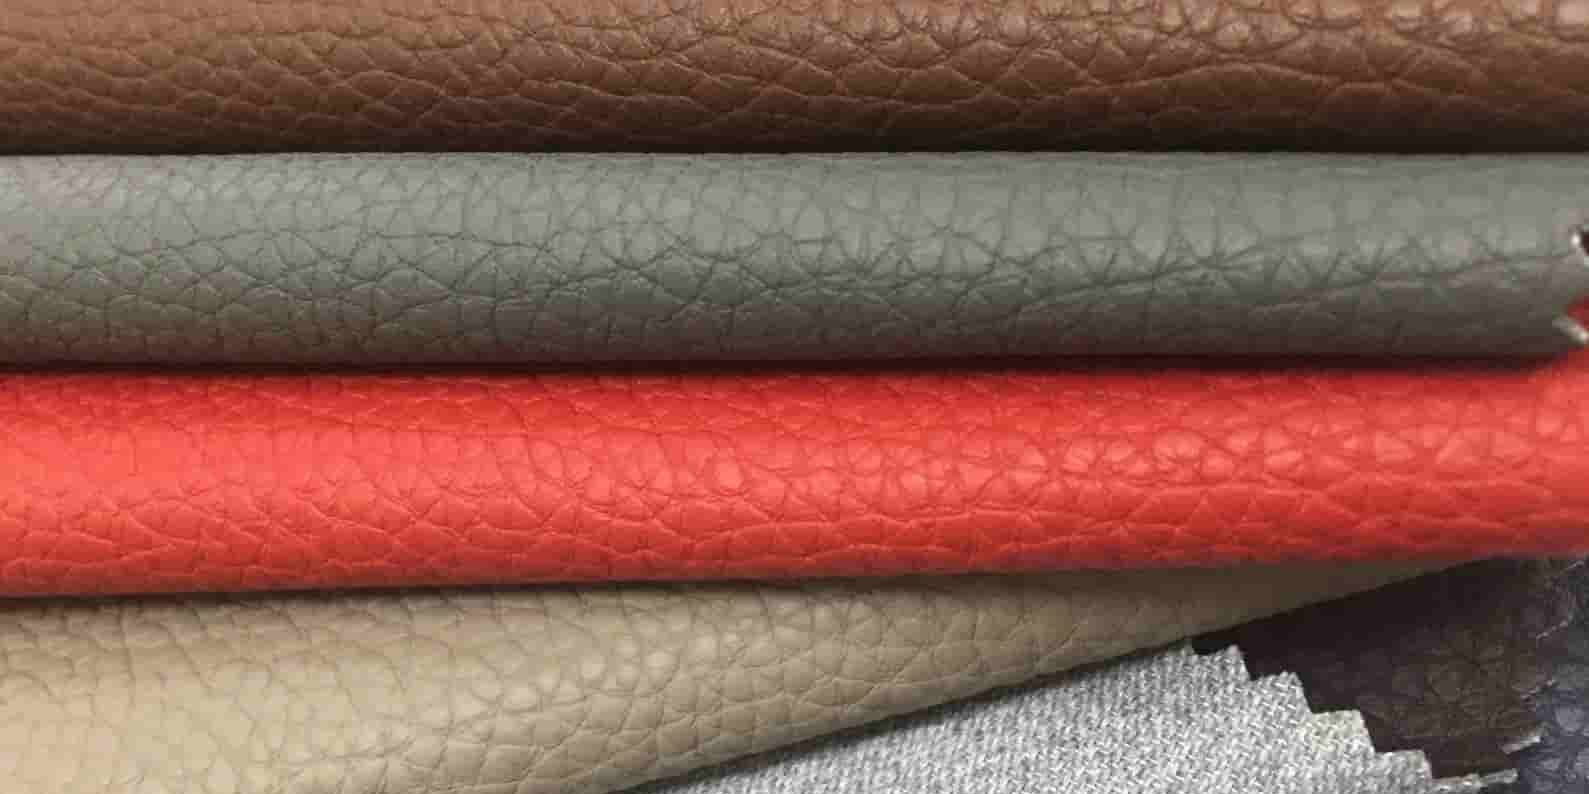 Faux Leather Fabric Purchase Price + Quality Test - Arad Branding